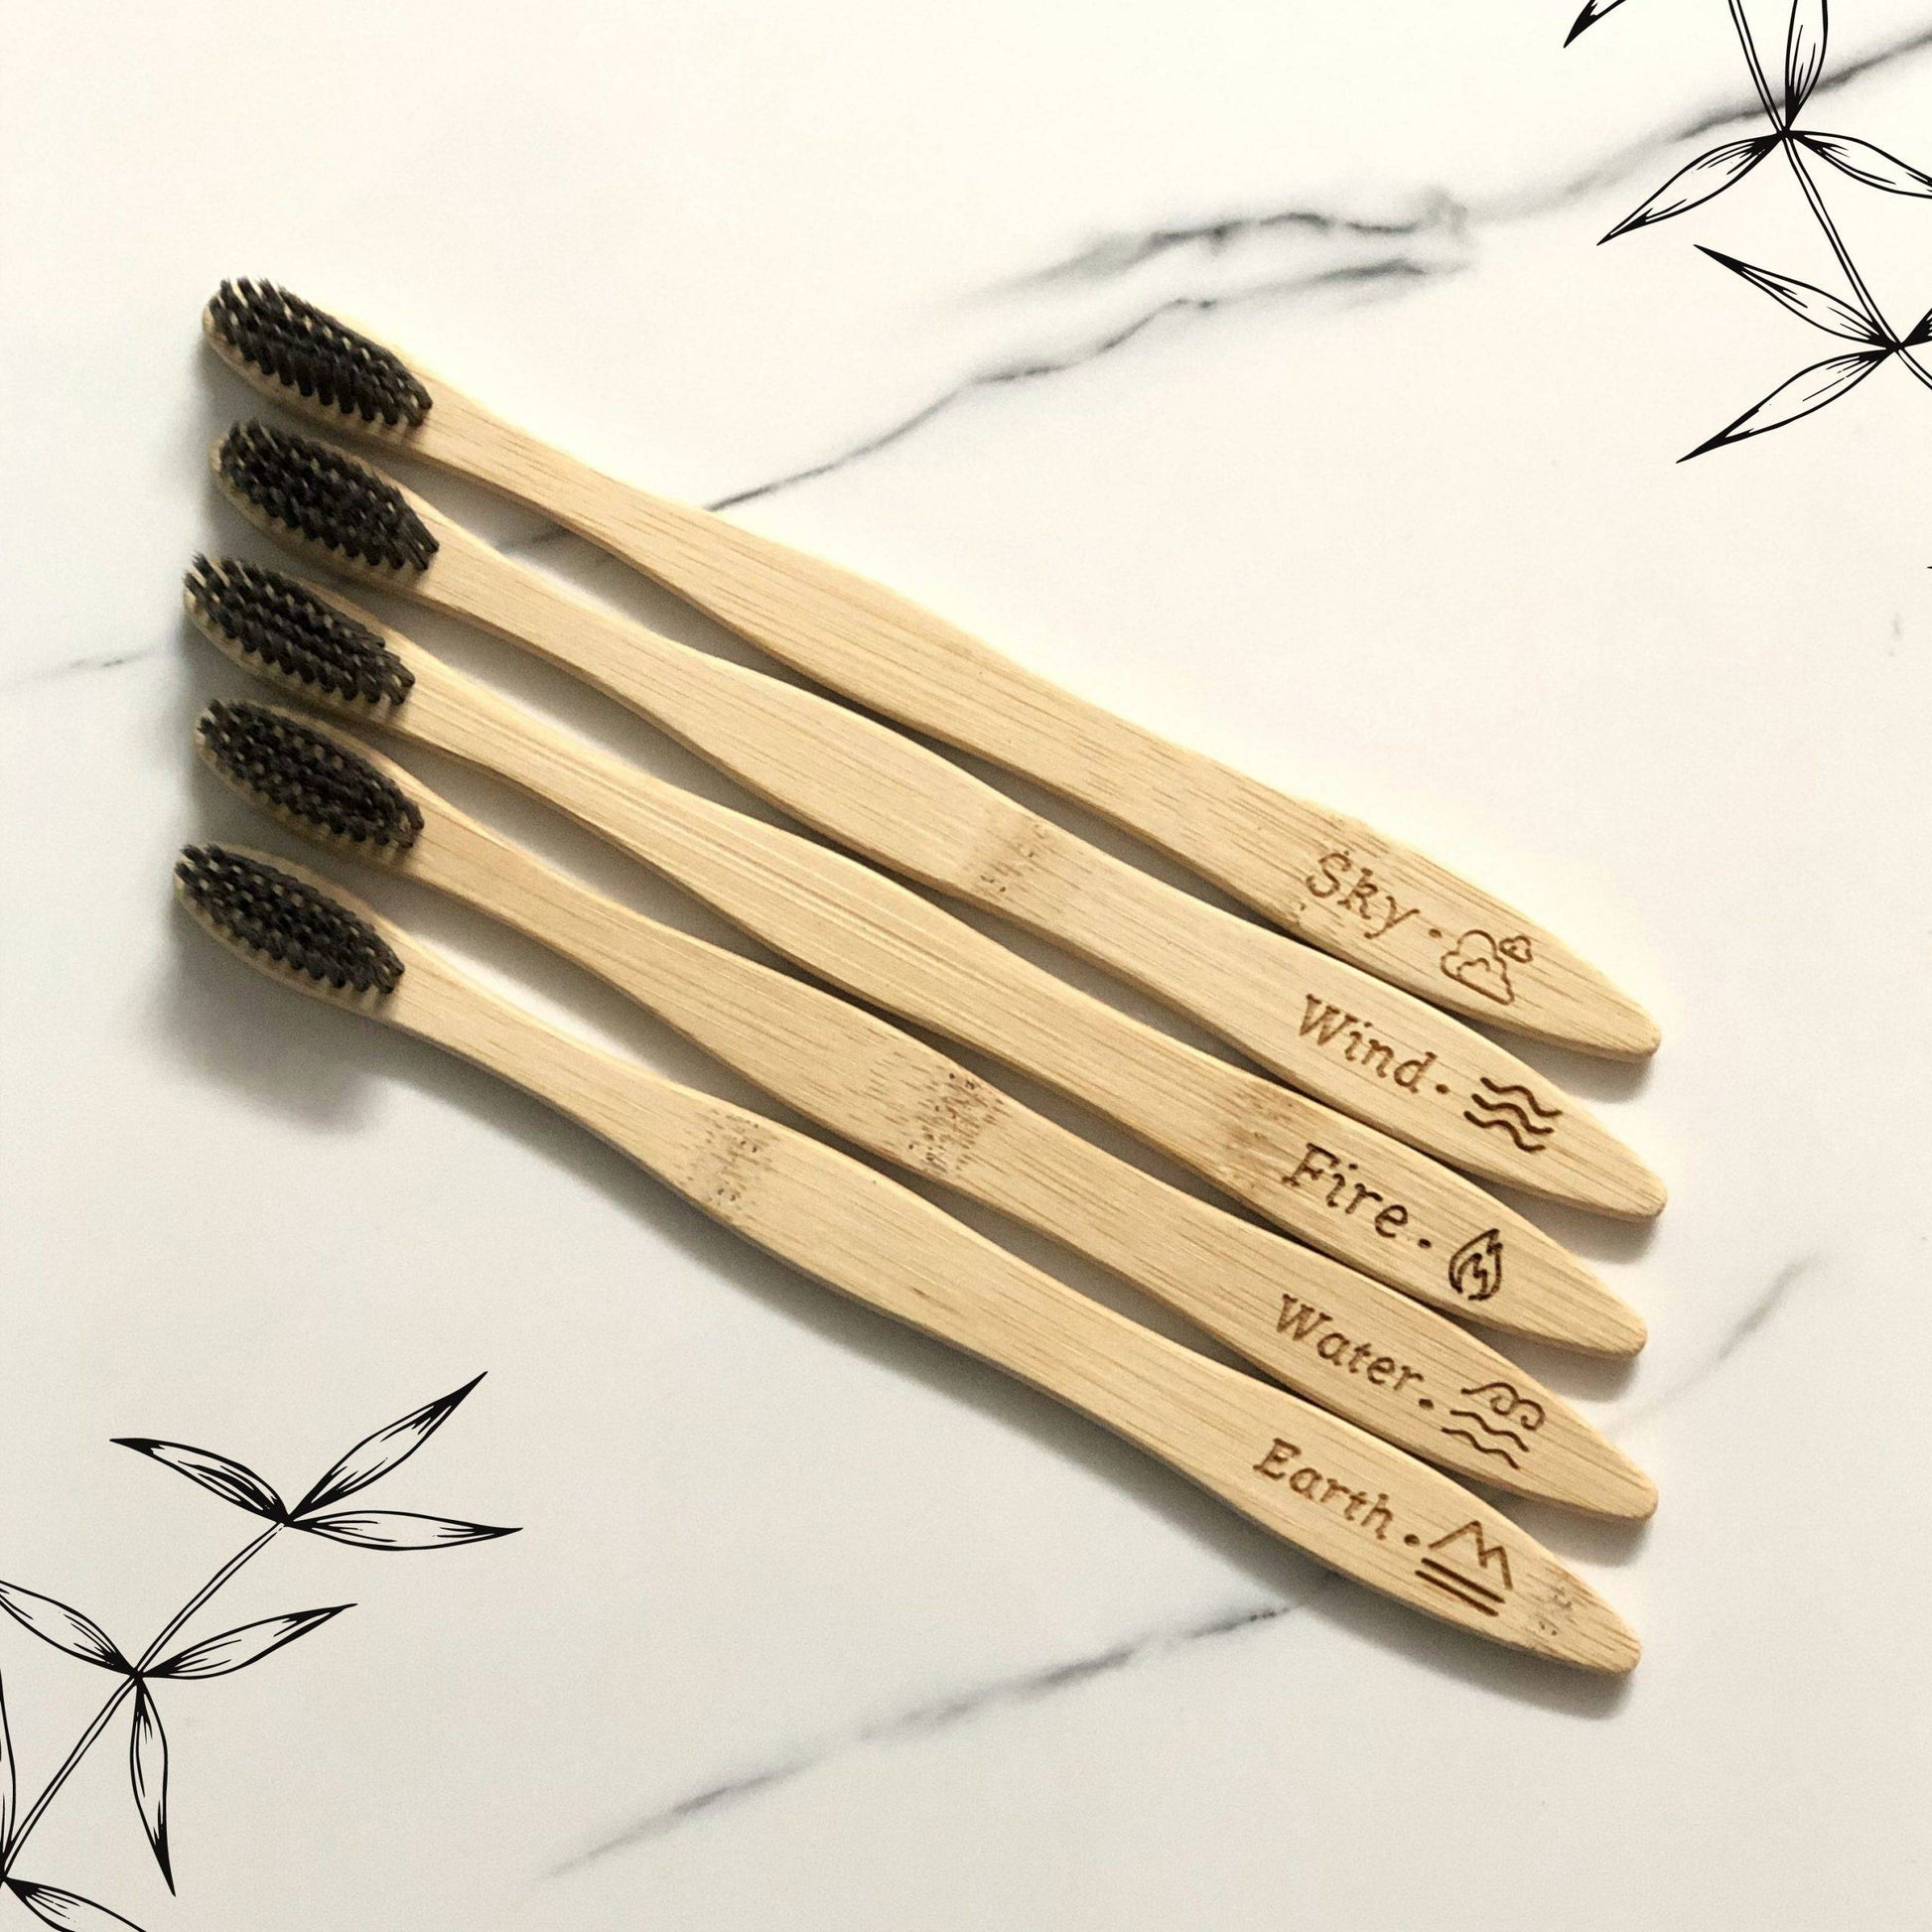 100% Biodegradable Bamboo Toothbrush with Soft Charcoal-activated Bristles (Set of 5) - For Adults